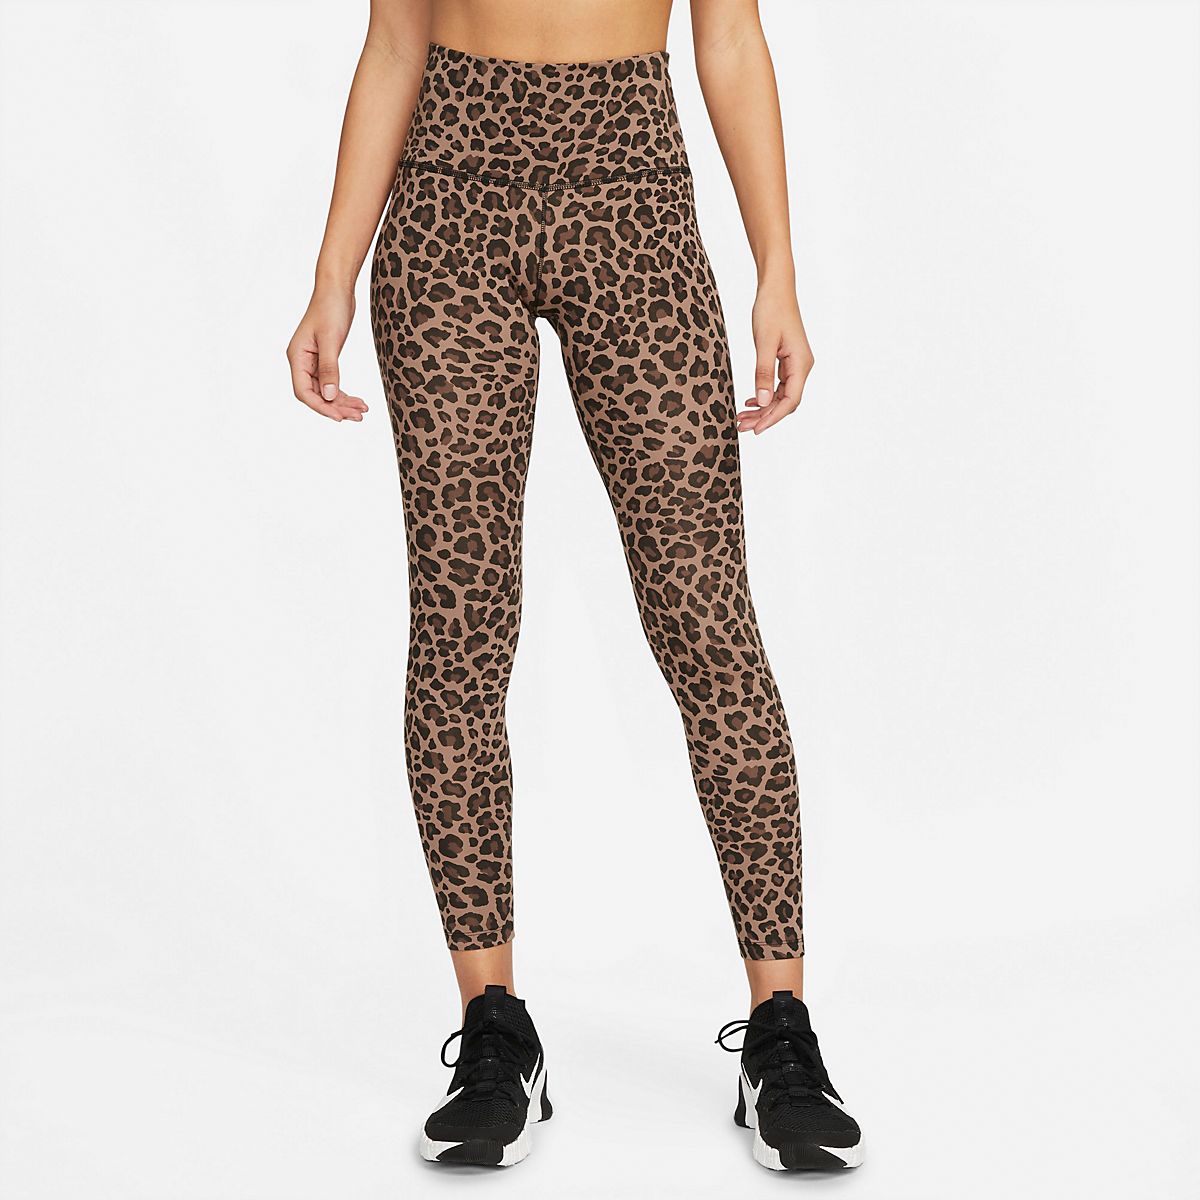 Nike Women's Dri-FIT One High-Rise Leopard Tights | Academy